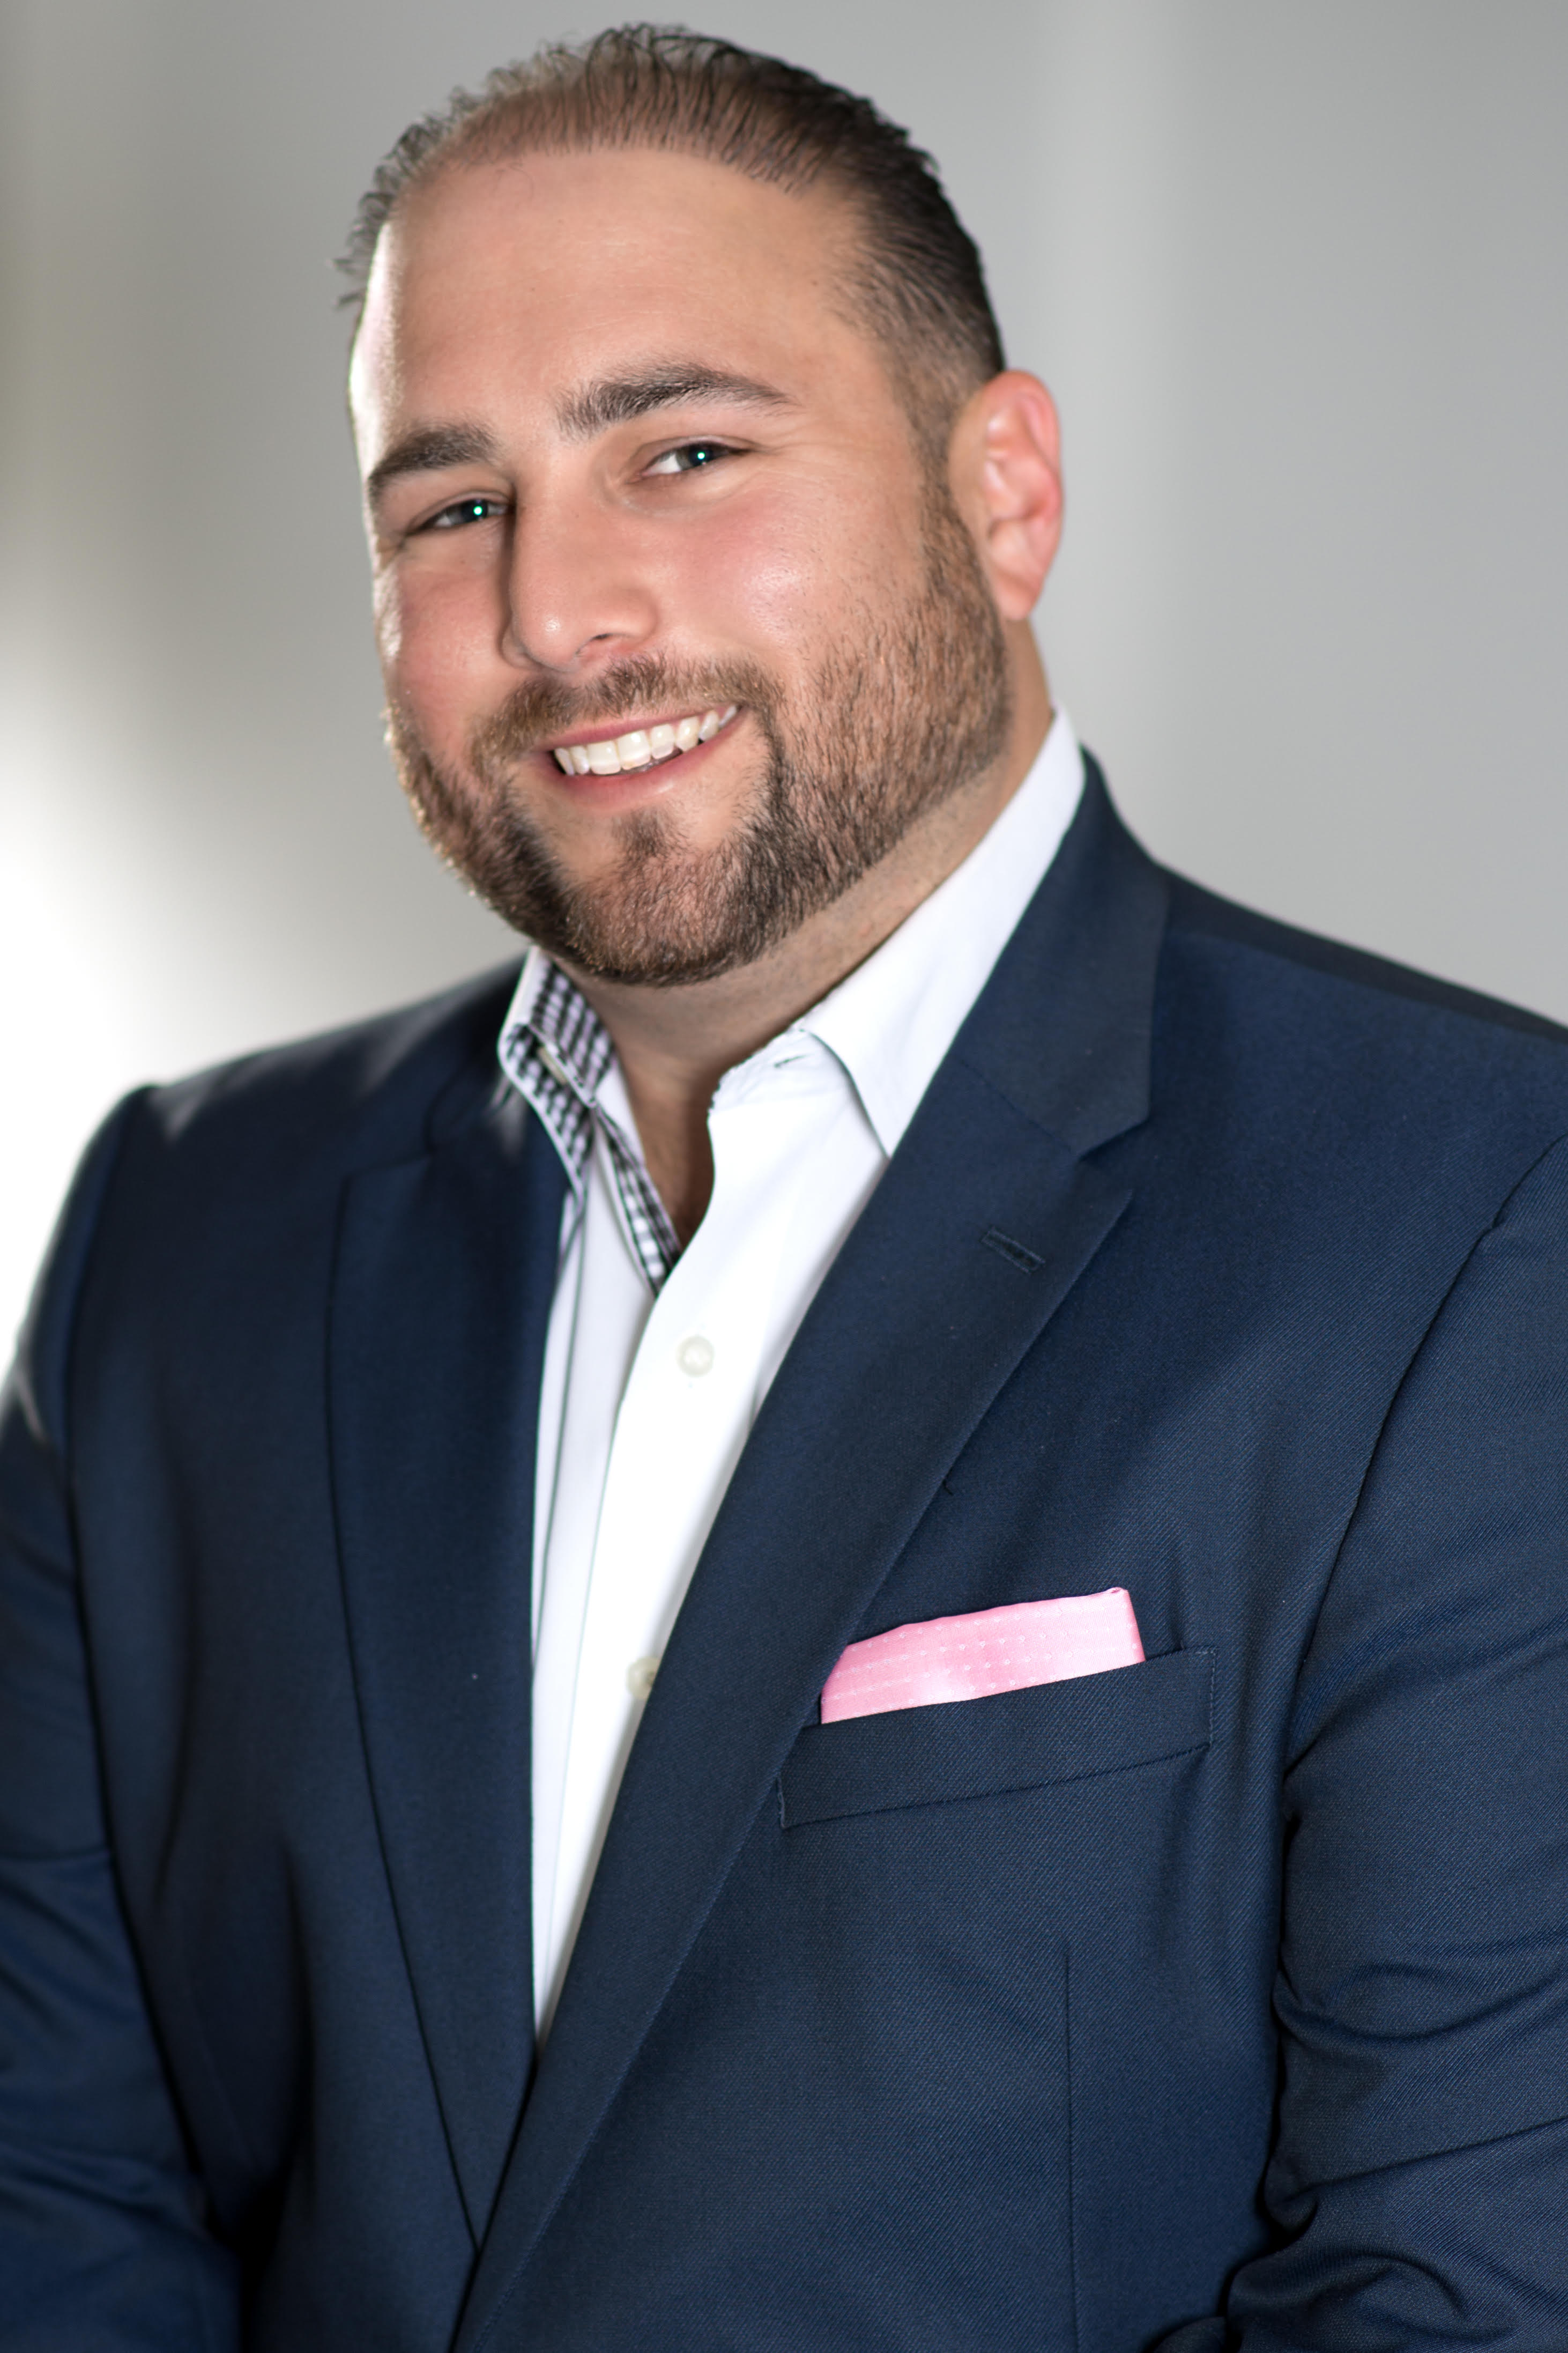 Robert Padron is a branch manager at 1st Financial Inc. in Coral Gables, Fla., and president of the Miami chapter of the Florida Association of Mortgage Professionals 